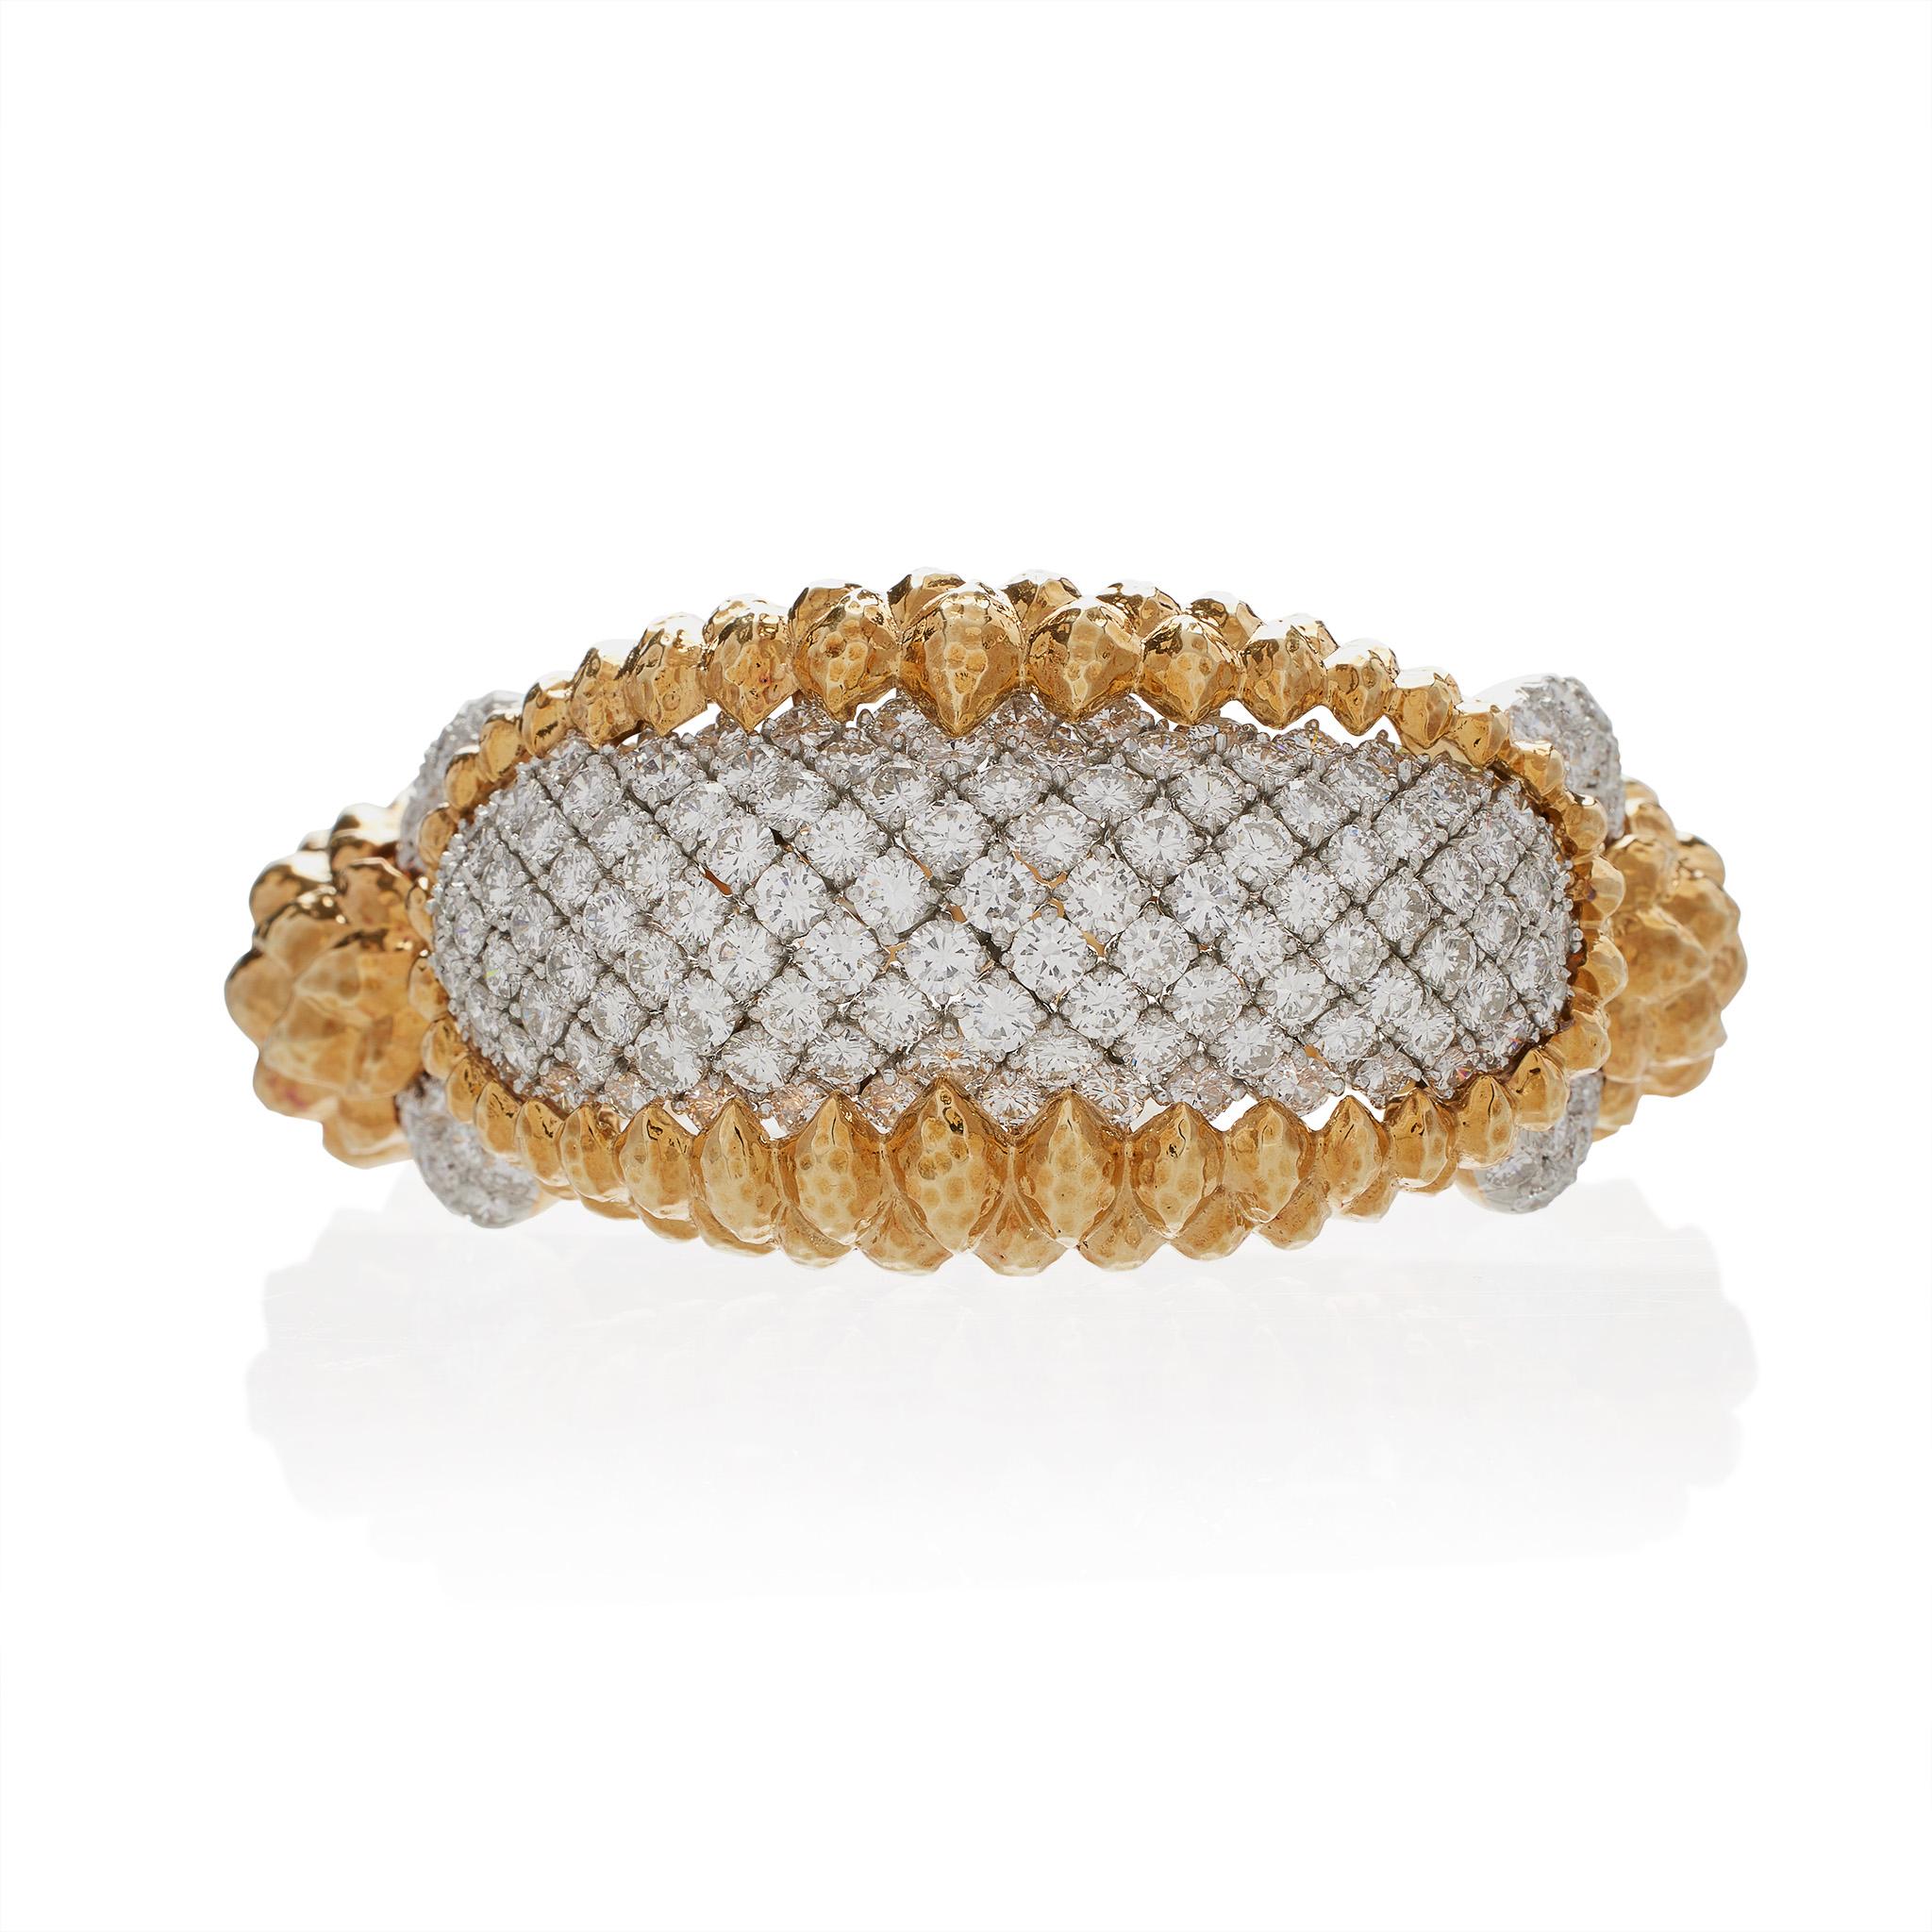 Created in the 1960s in the studio of David Webb, this one-of-a-kind “Crosshatch” diamond bracelet in 18K gold and platinum is set with over 16.50 carats of diamonds. The bombé curved top section is paved with round brilliant-cut diamonds arranged